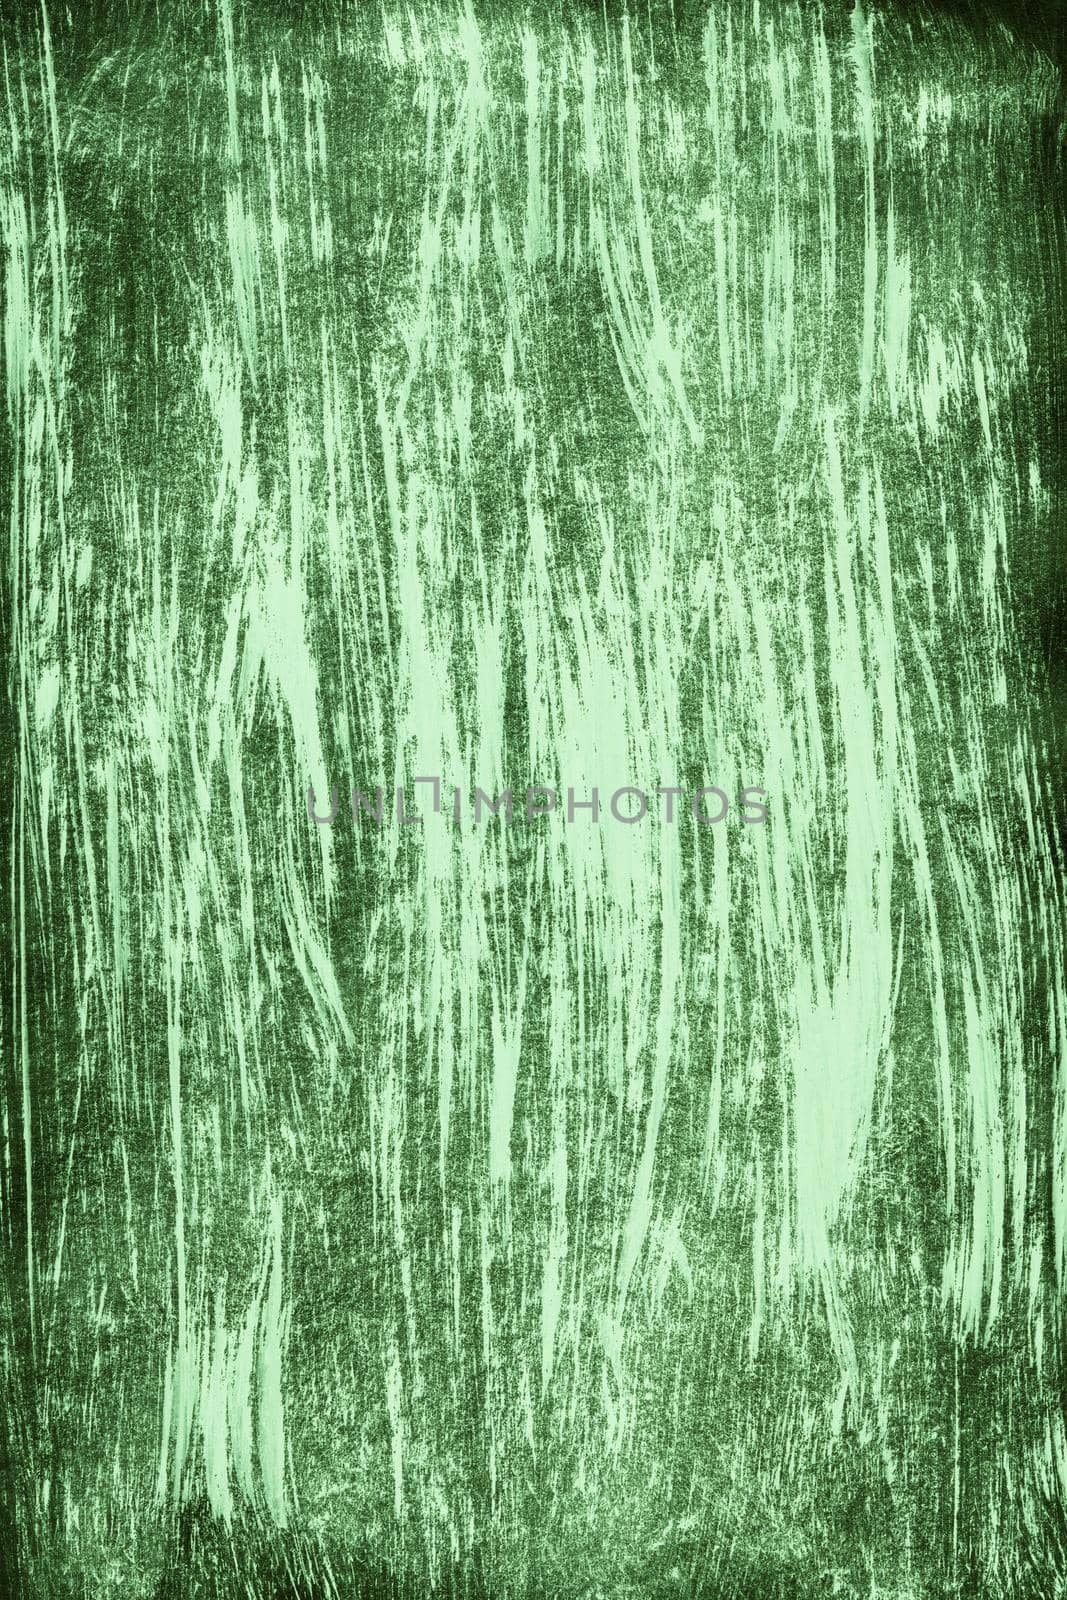 The painted leaf is green with a gouache brush. Hand-drawn gouache green abstract background. Texture of brush strokes.